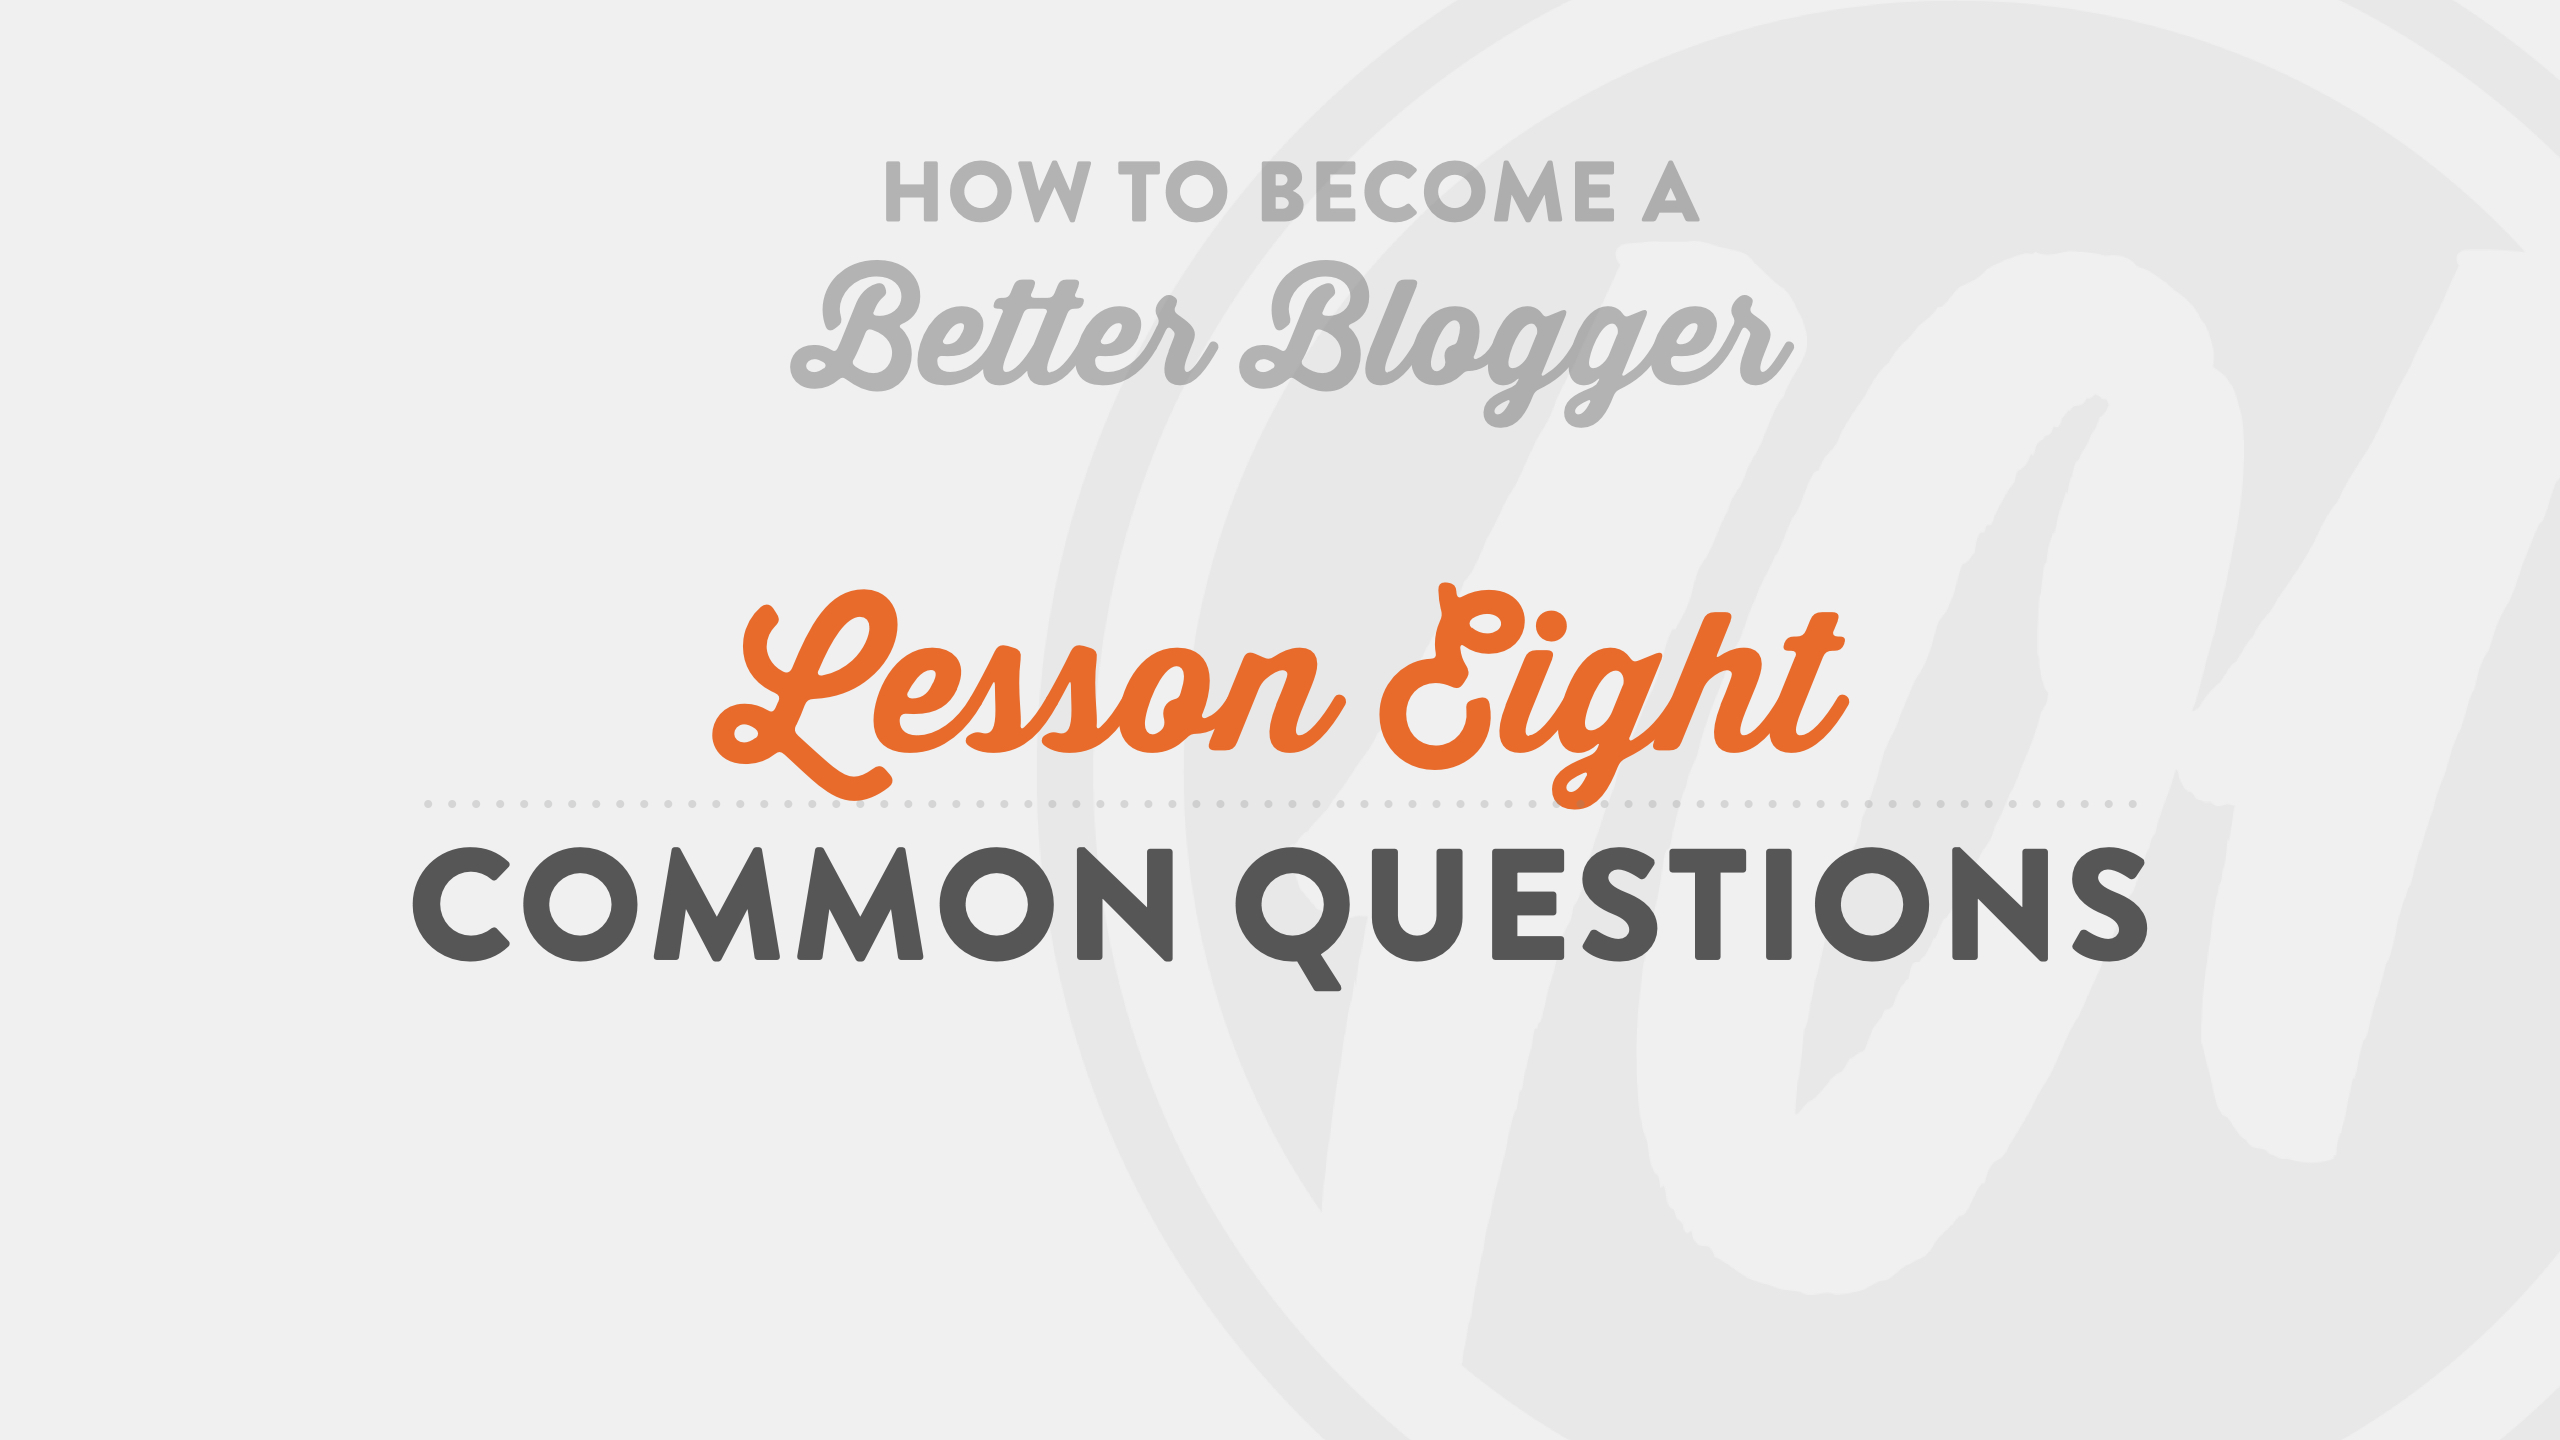 most-common-questions-from-beginner-bloggers-by-chris-lema